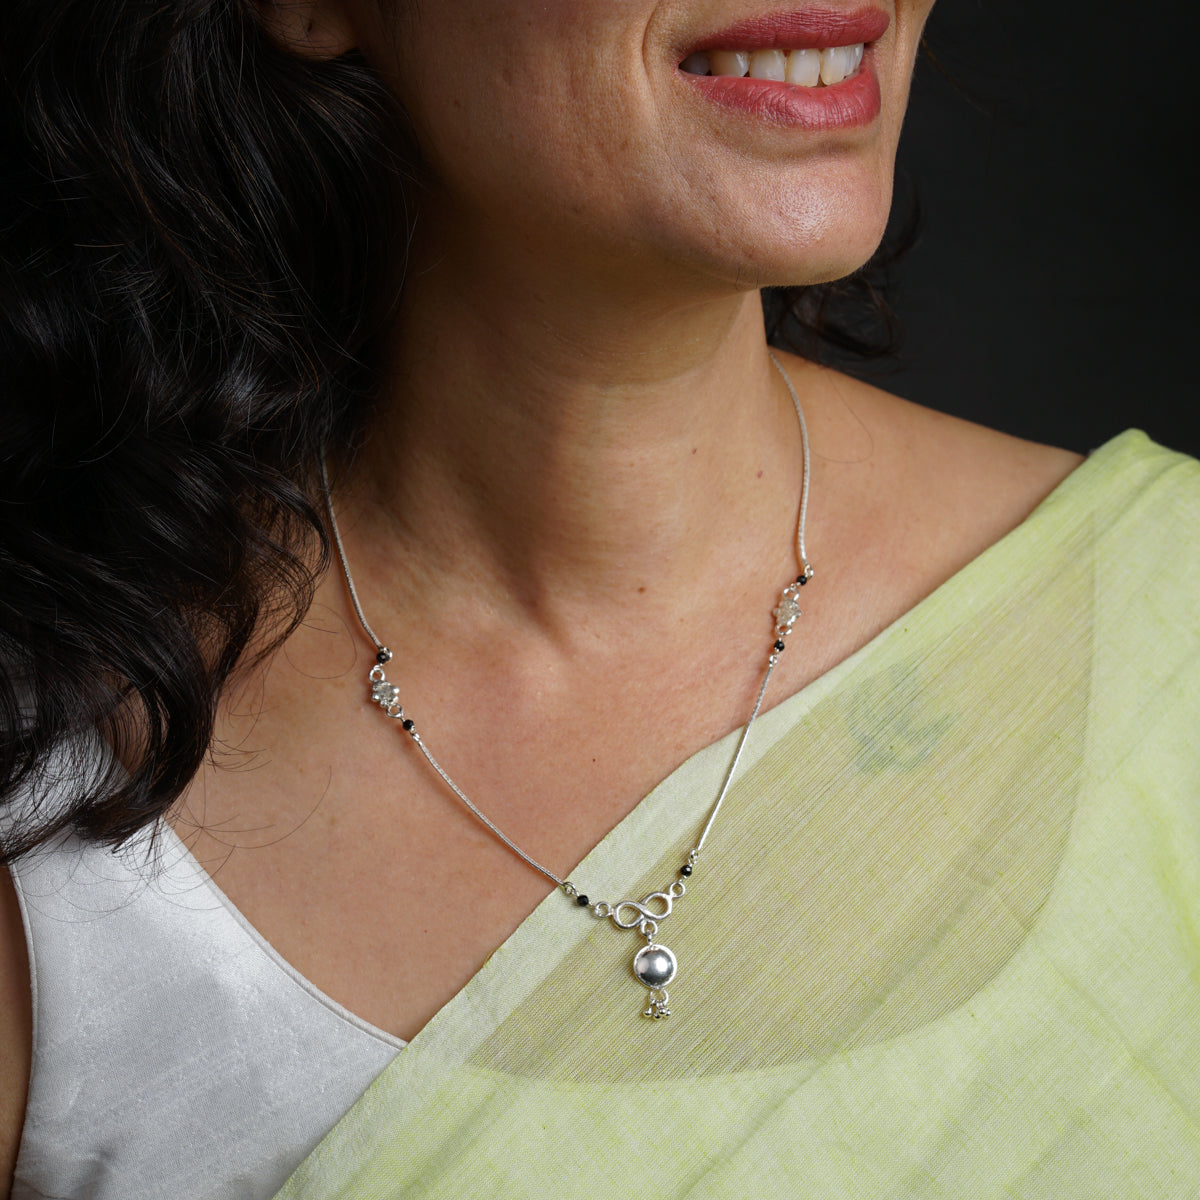 Silver mangalsutra with kudi and infinity motif